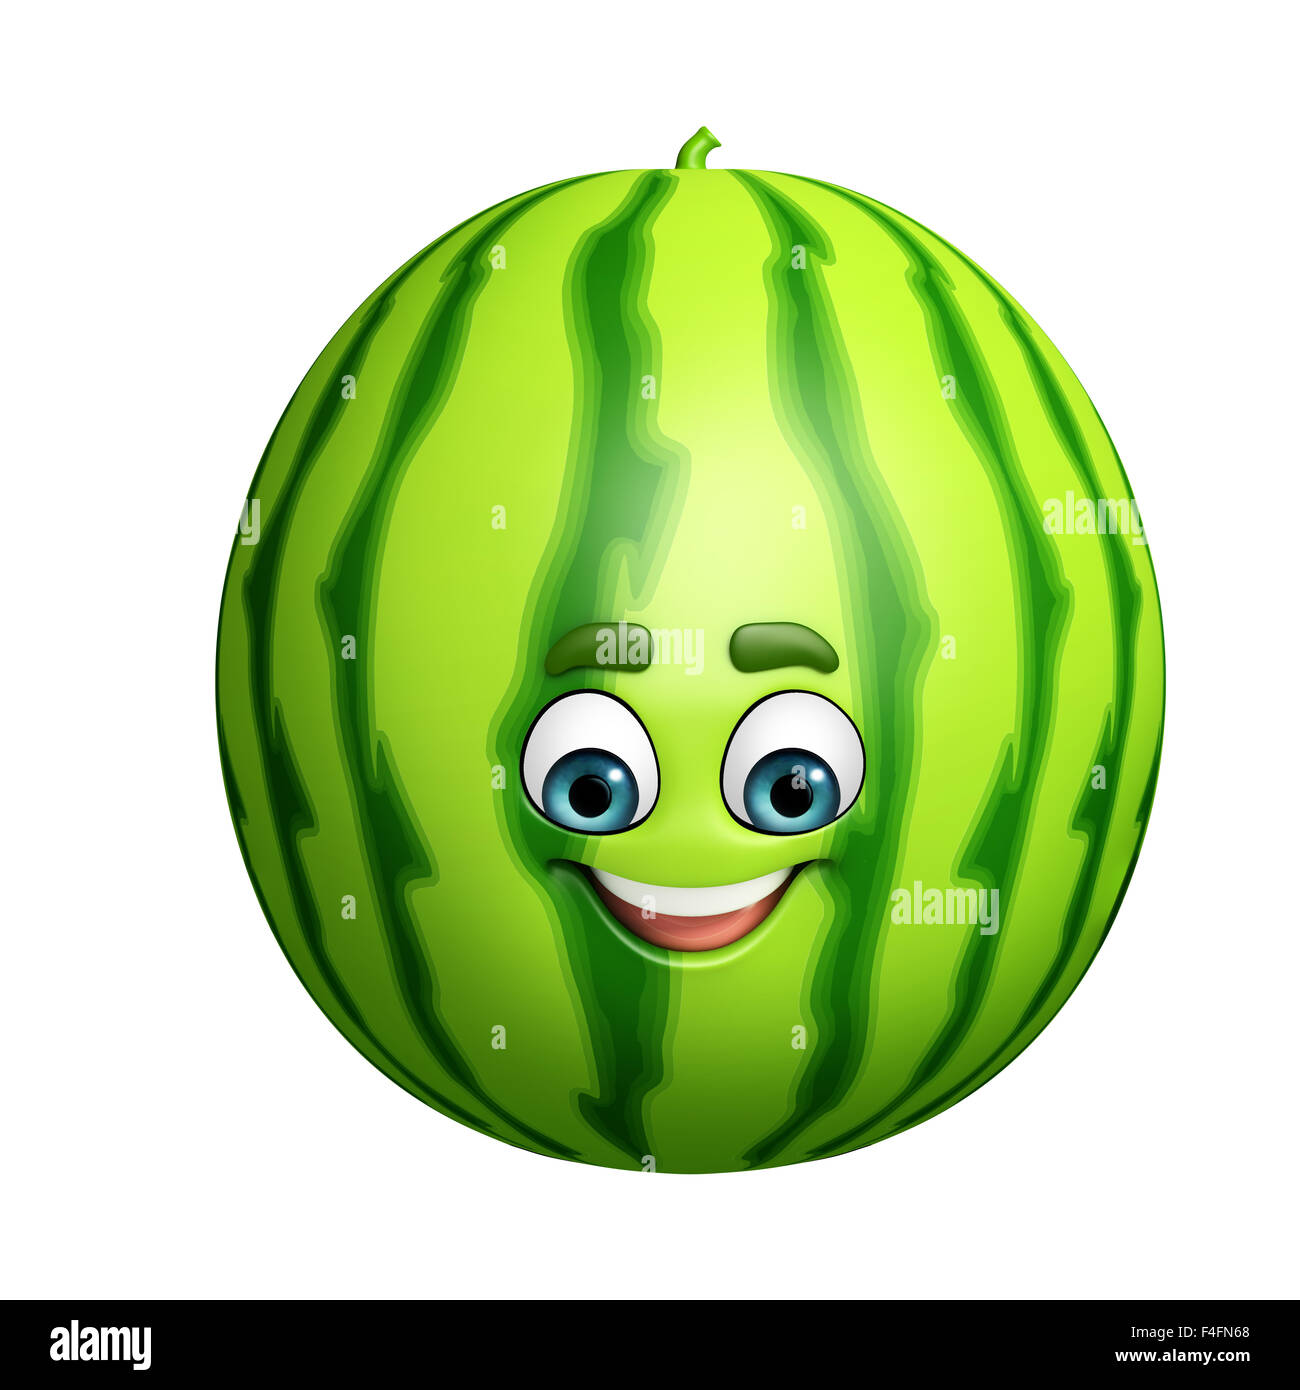 3d rendered illustration of watermelon cartoon character Stock Photo